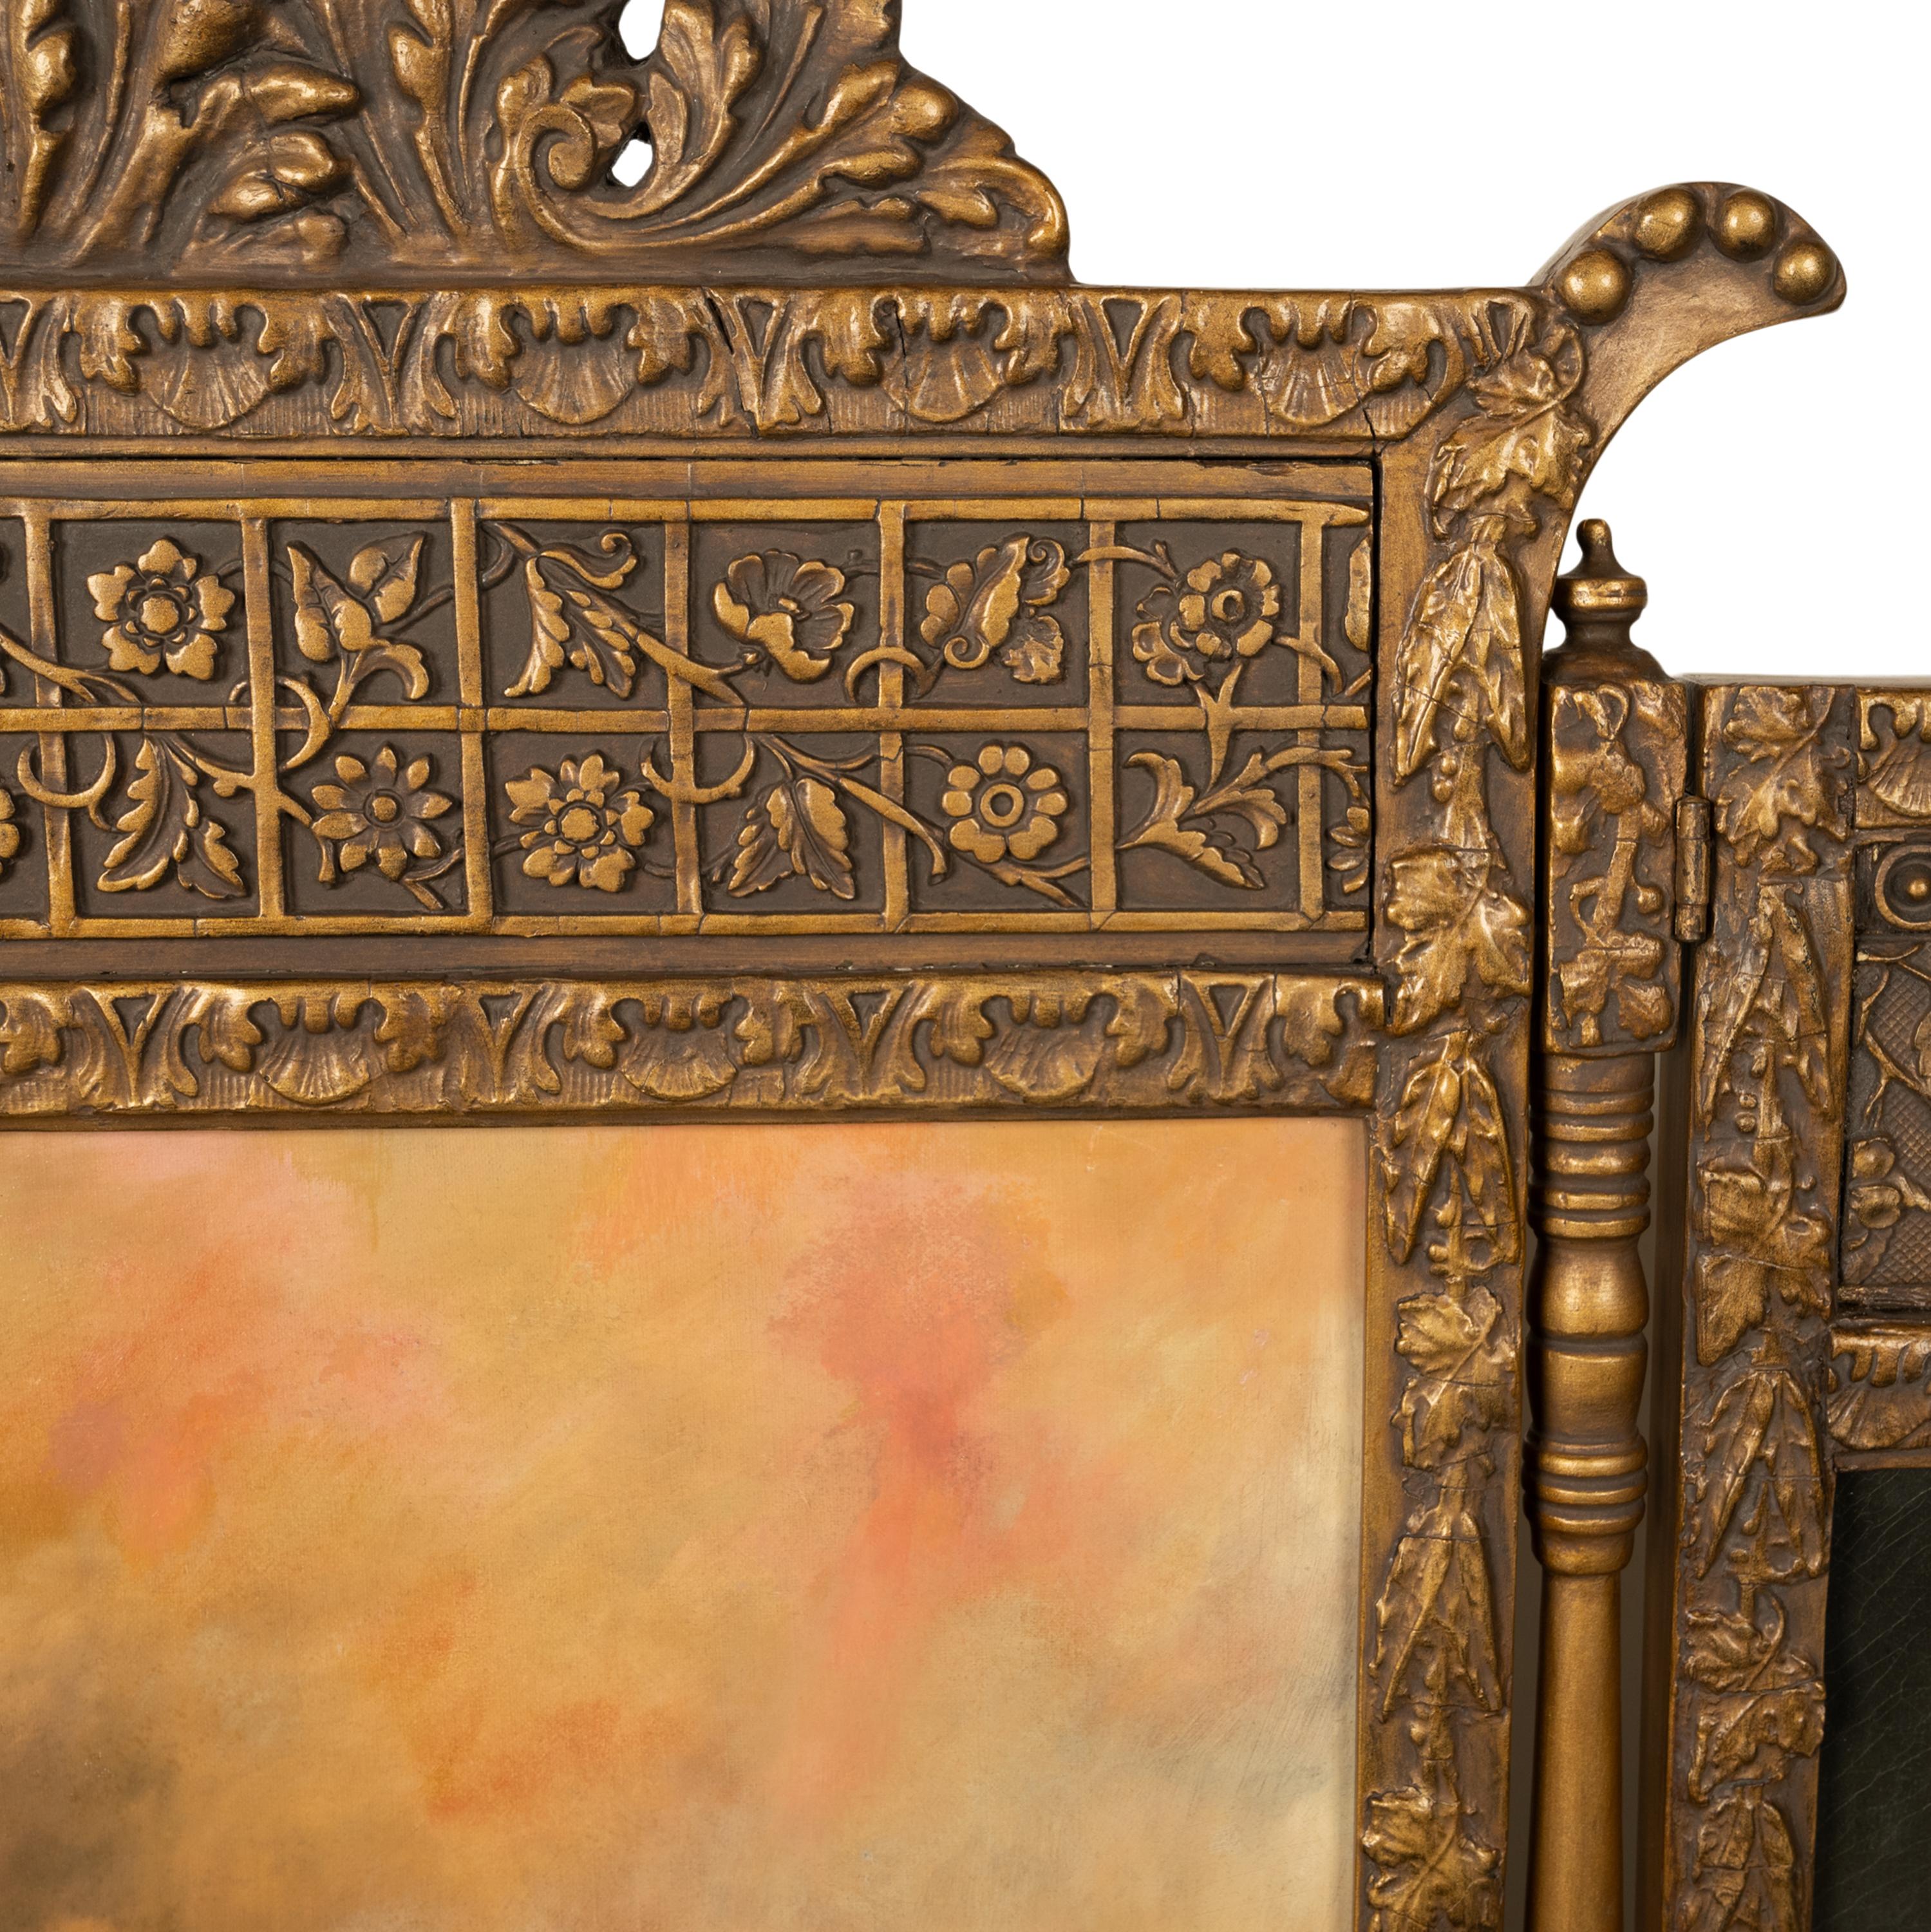  Antique Gilded Room Divider Screen Oil Painting Aesthetic Movement NY 1885 For Sale 2